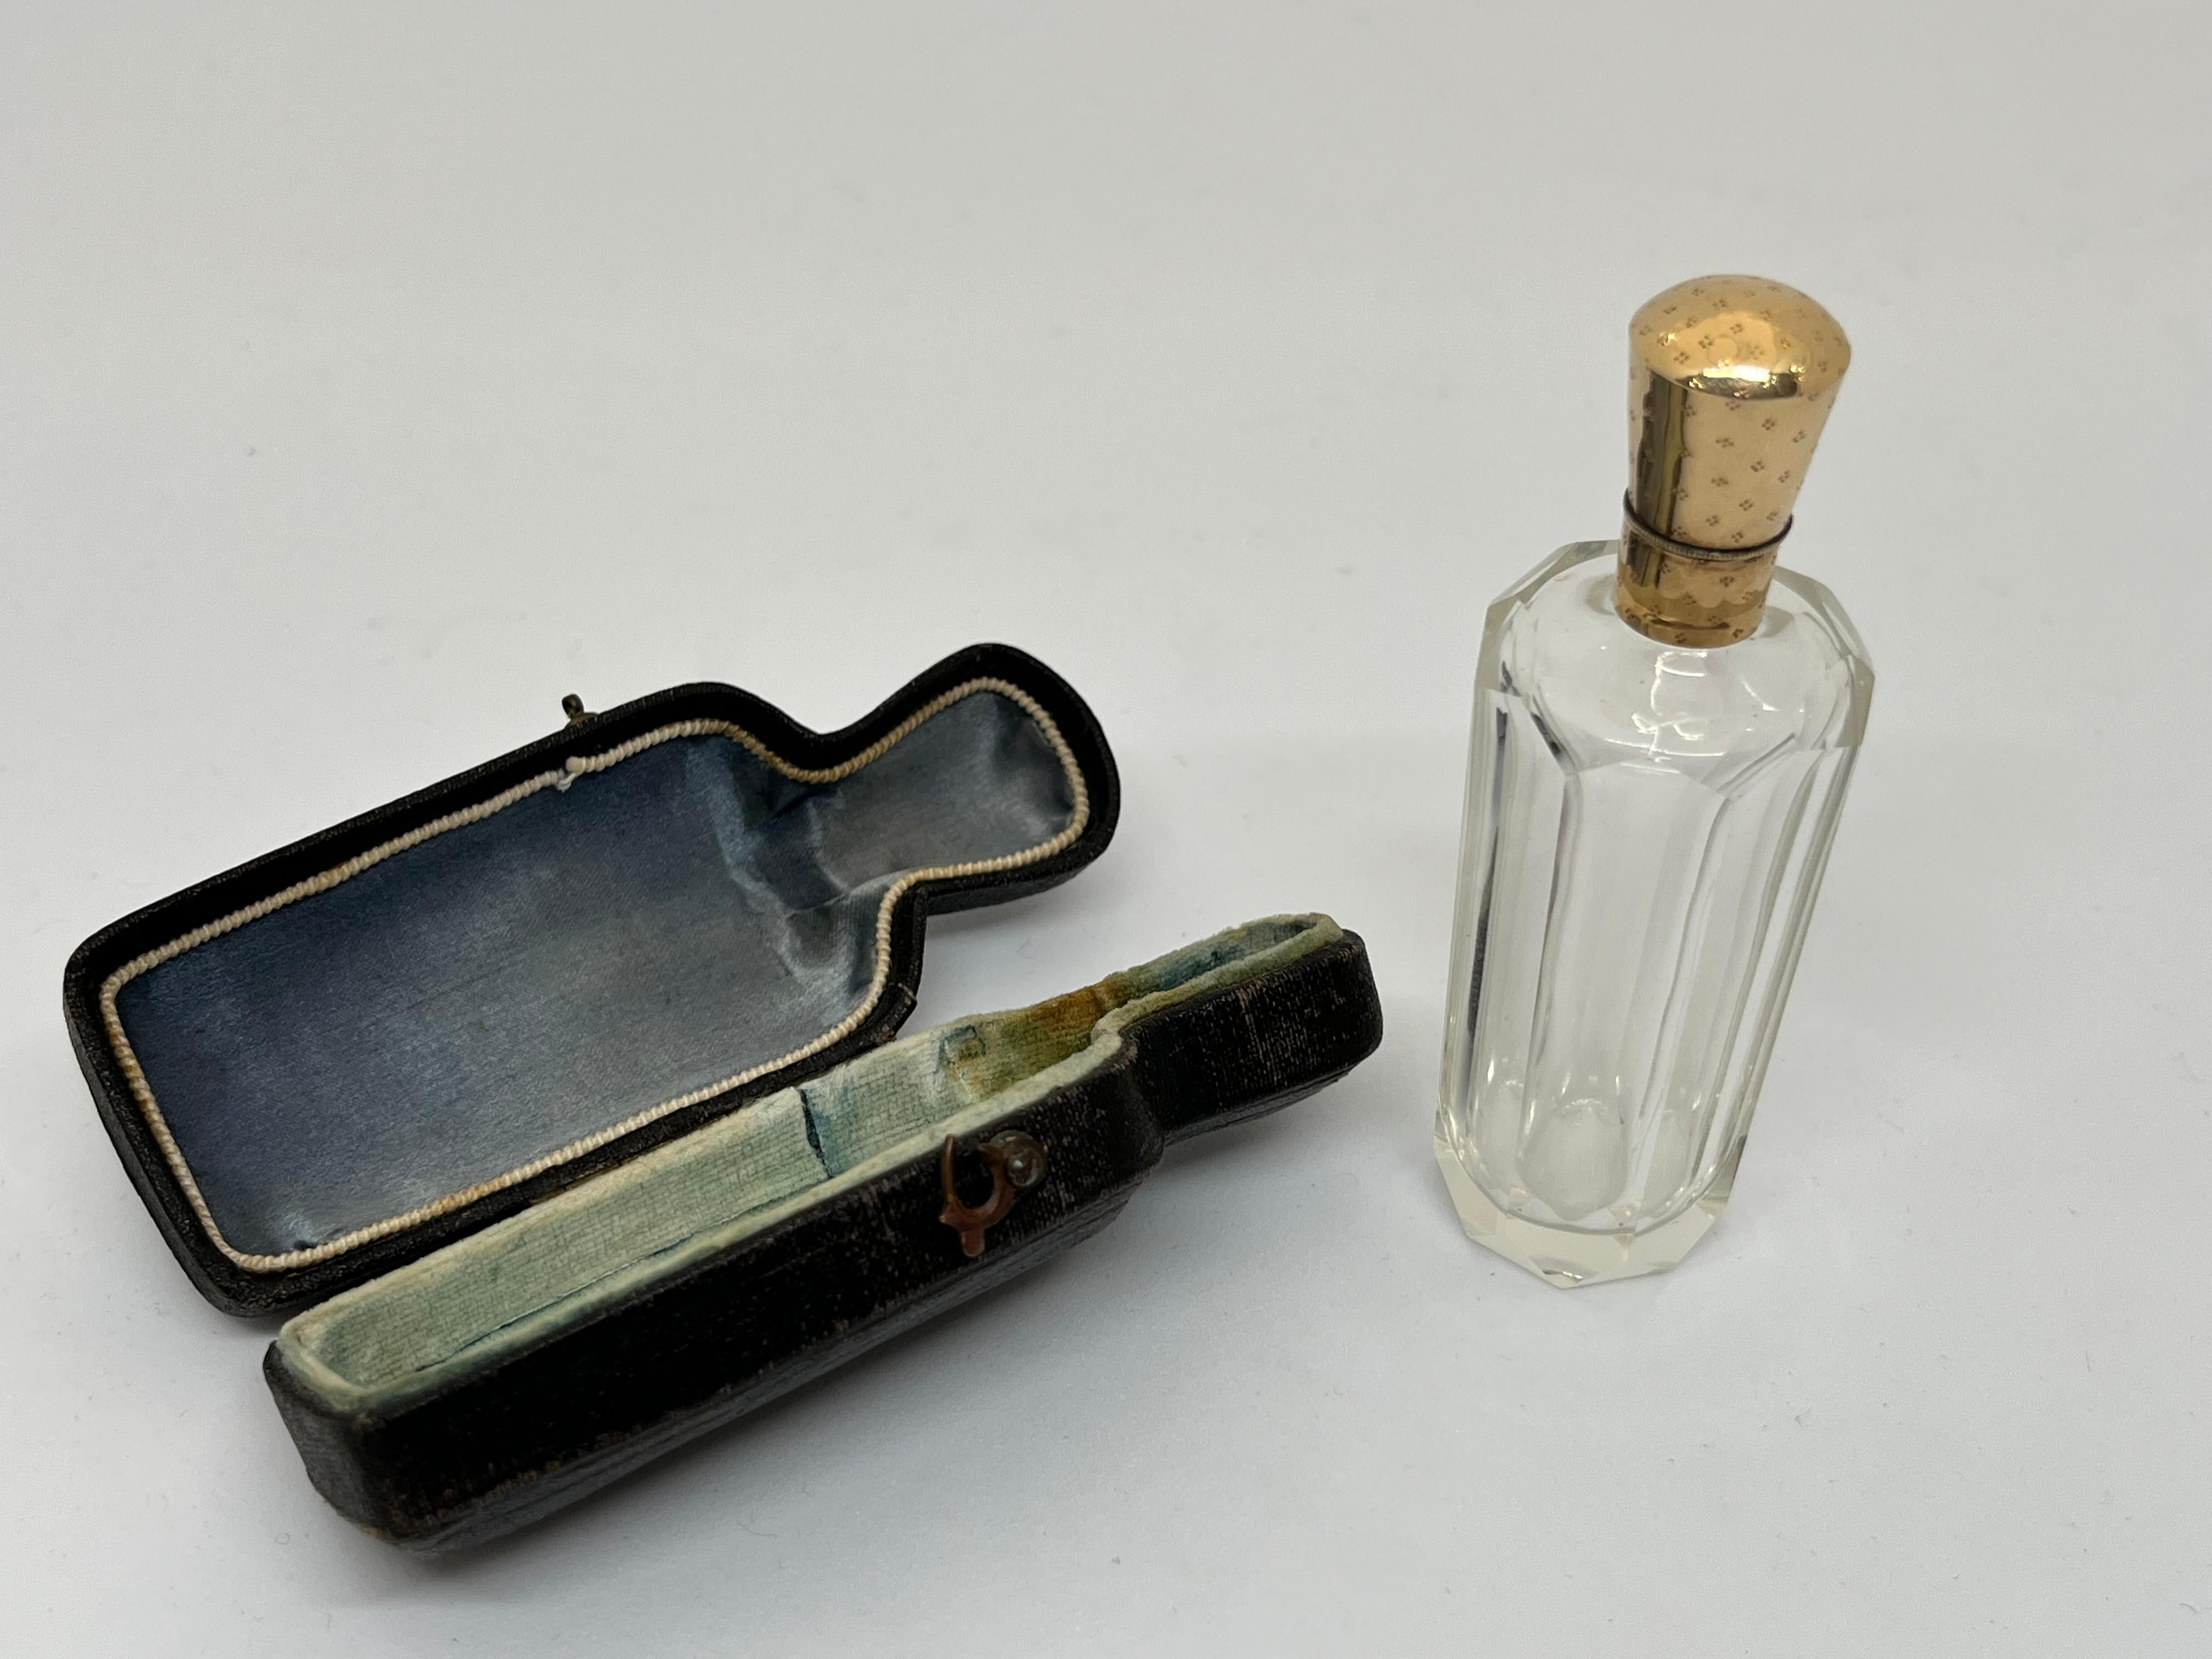 14ct Gold.

 

A mid-nineteenth century Dutch scent bottle, the faceted glass body mounted in14 carat gold, the hinged cap decorated with delicate quatrefoil design, opens to reveal a well-fitting stopper, presented in original satin-lined